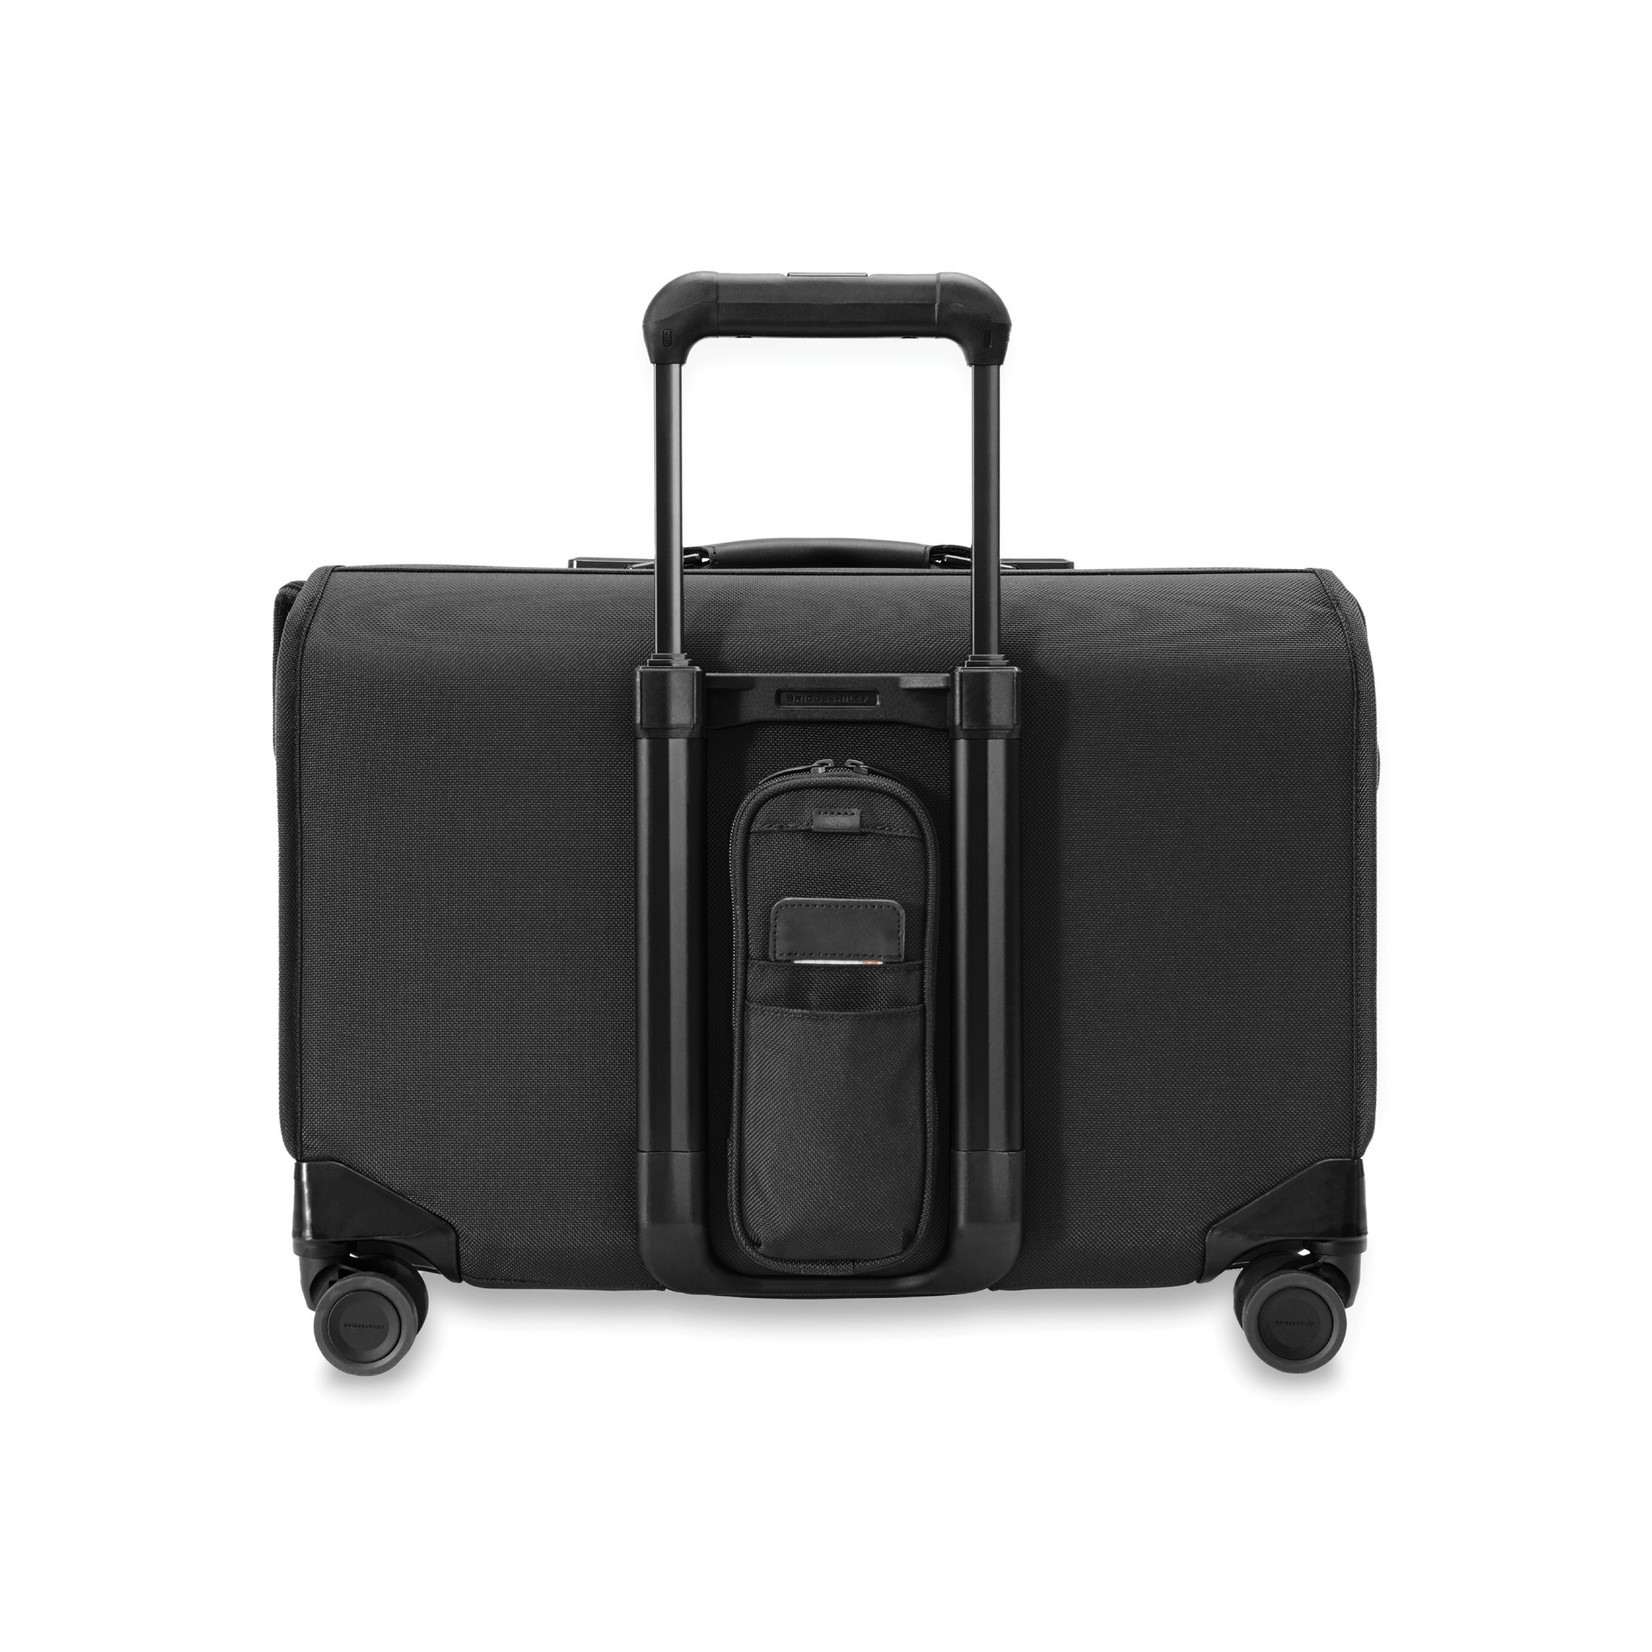 BRIGGS & RILEY BASELINE WIDE CARRY-ON GARMENT SPINNER